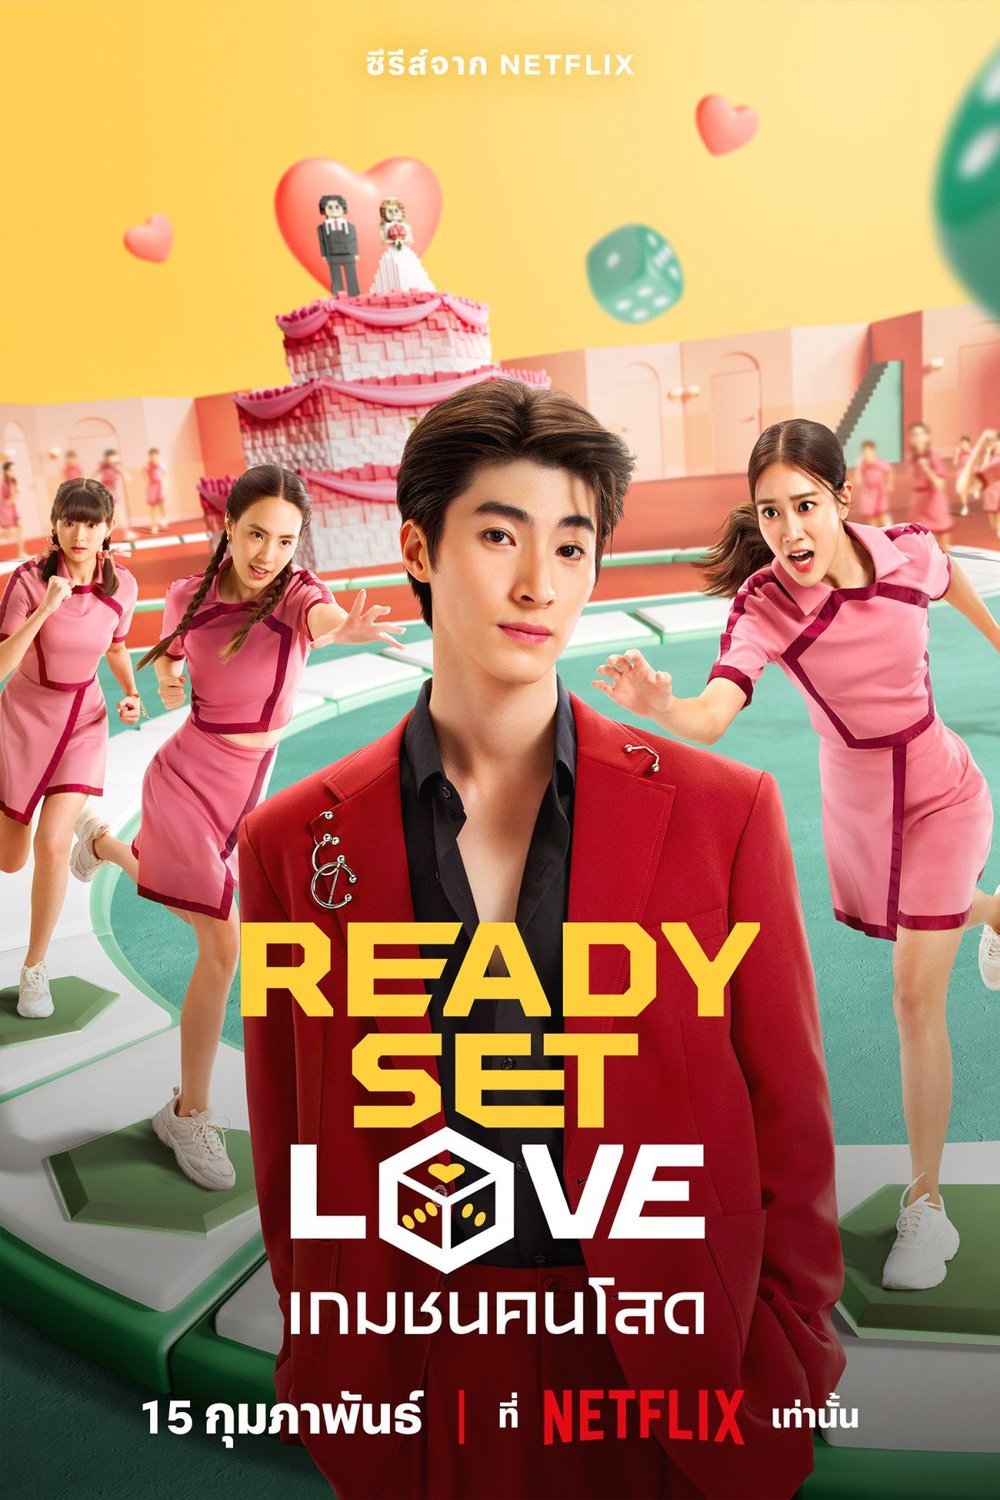 Thai poster of the movie Ready, Set, Love